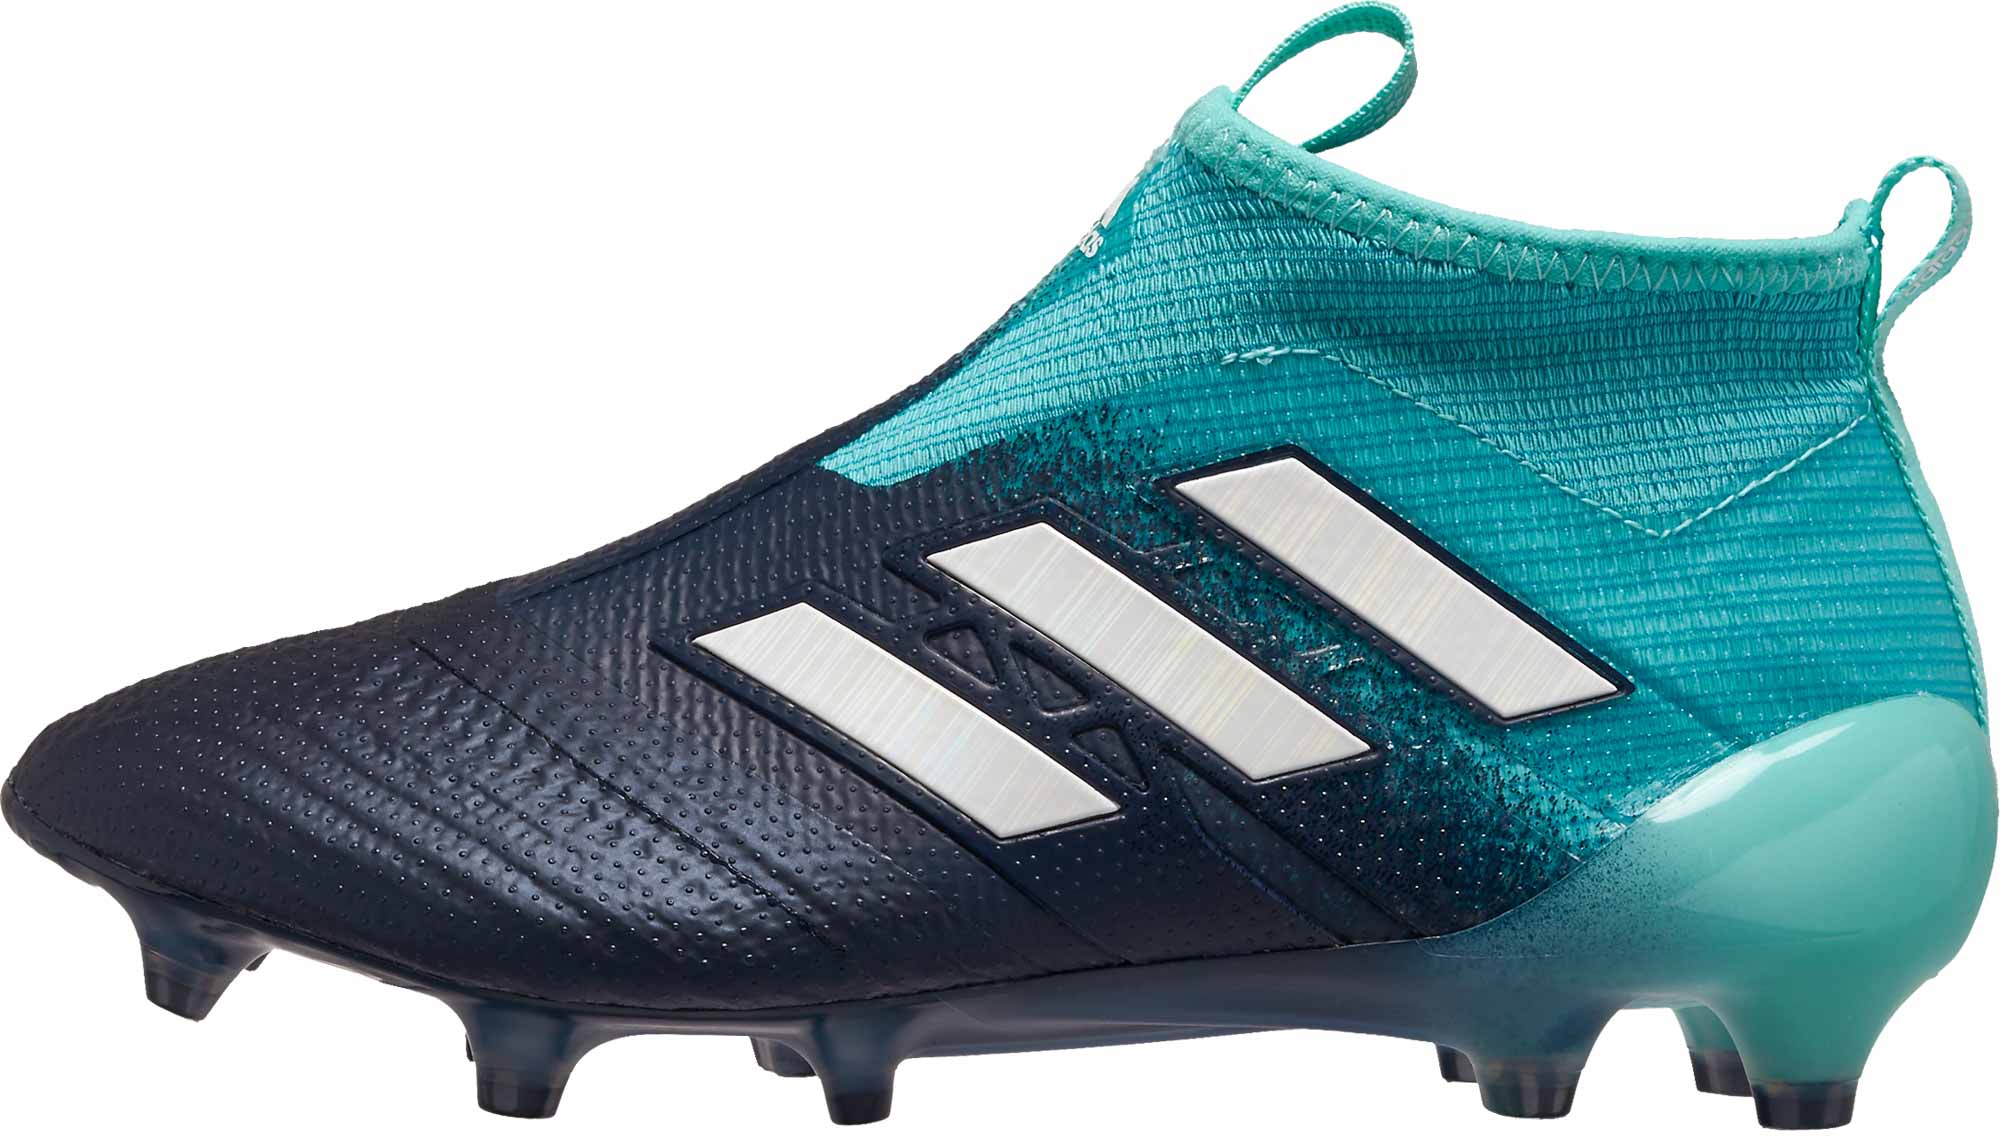 adidas youth cleats soccer